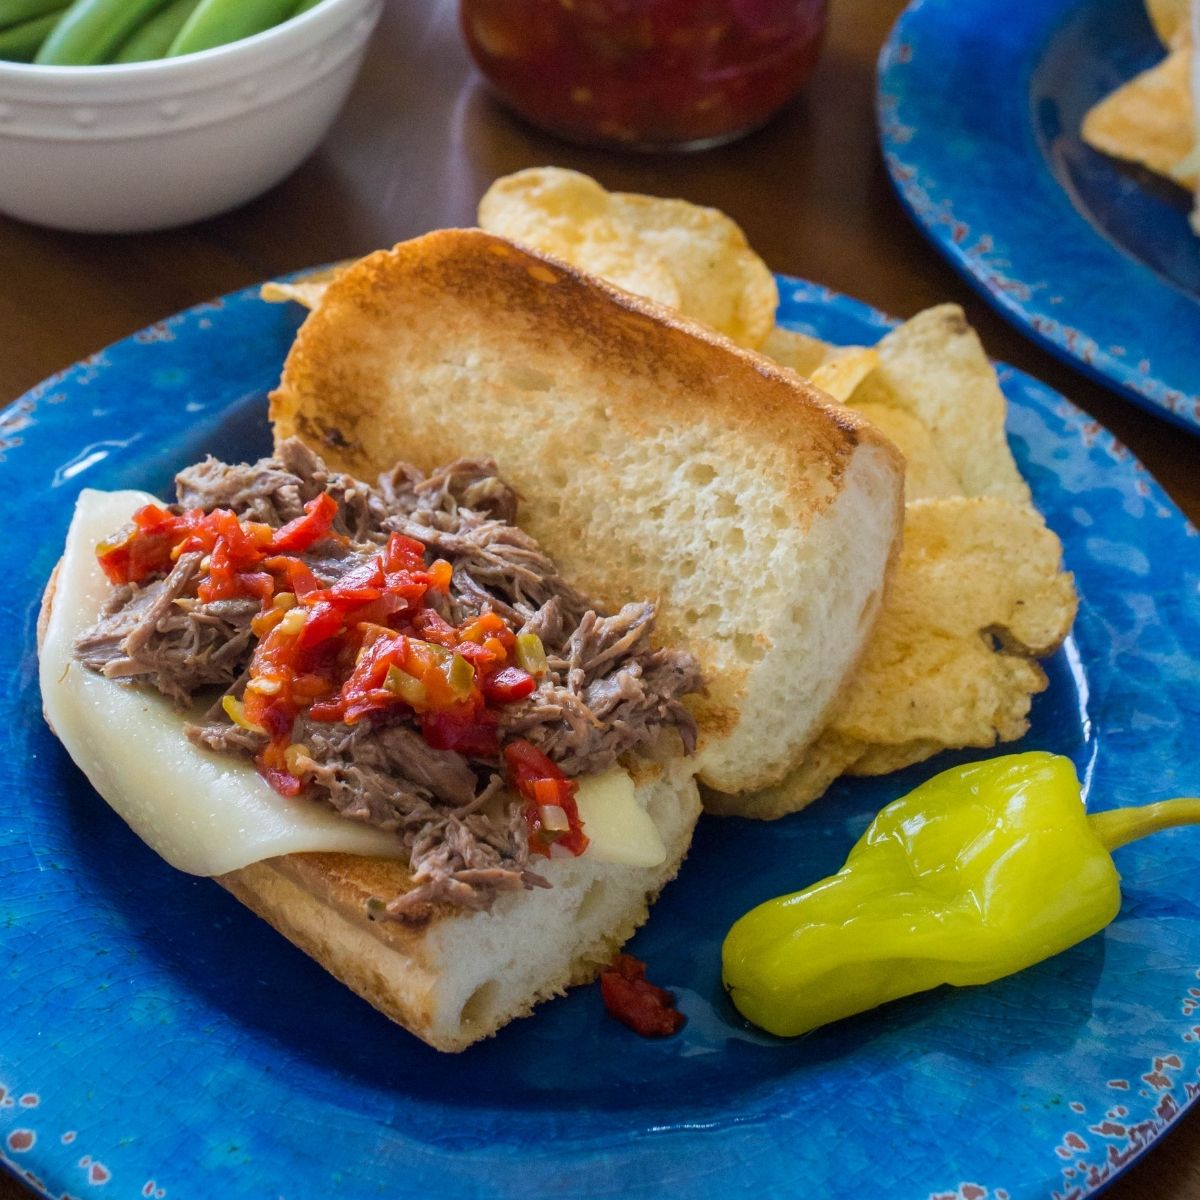 Italian beef sandwich has toasted bread, melted provolone cheese, and pepper relish on top of the shredded beef.